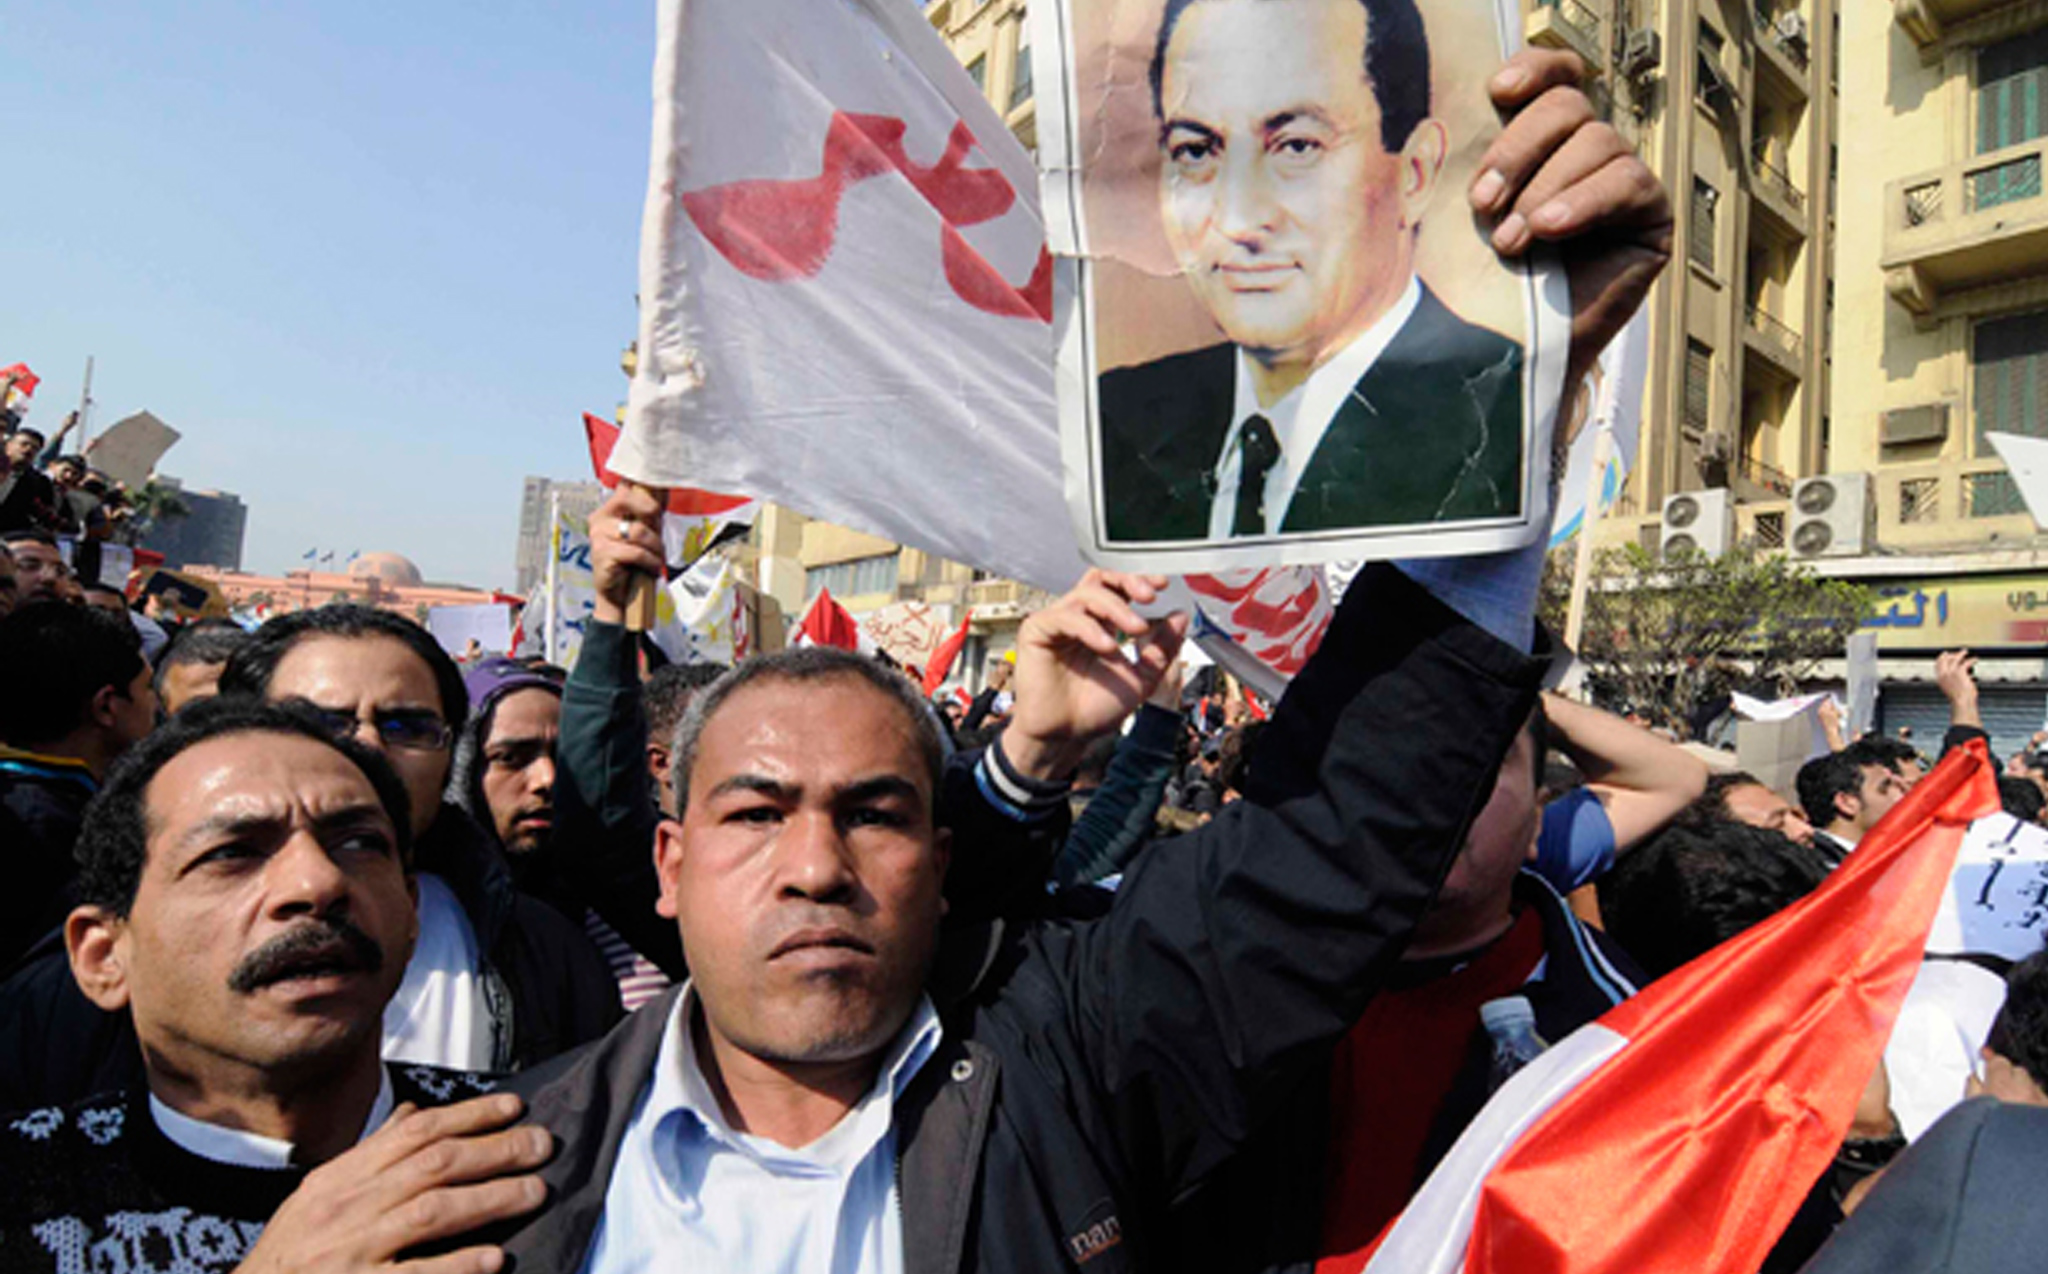 The following day, on February 2, Mubarak's supporters planned to put an end to the Tahrir ‘masquerade’.<br>
(Photo credit: Mehdi Chebil)